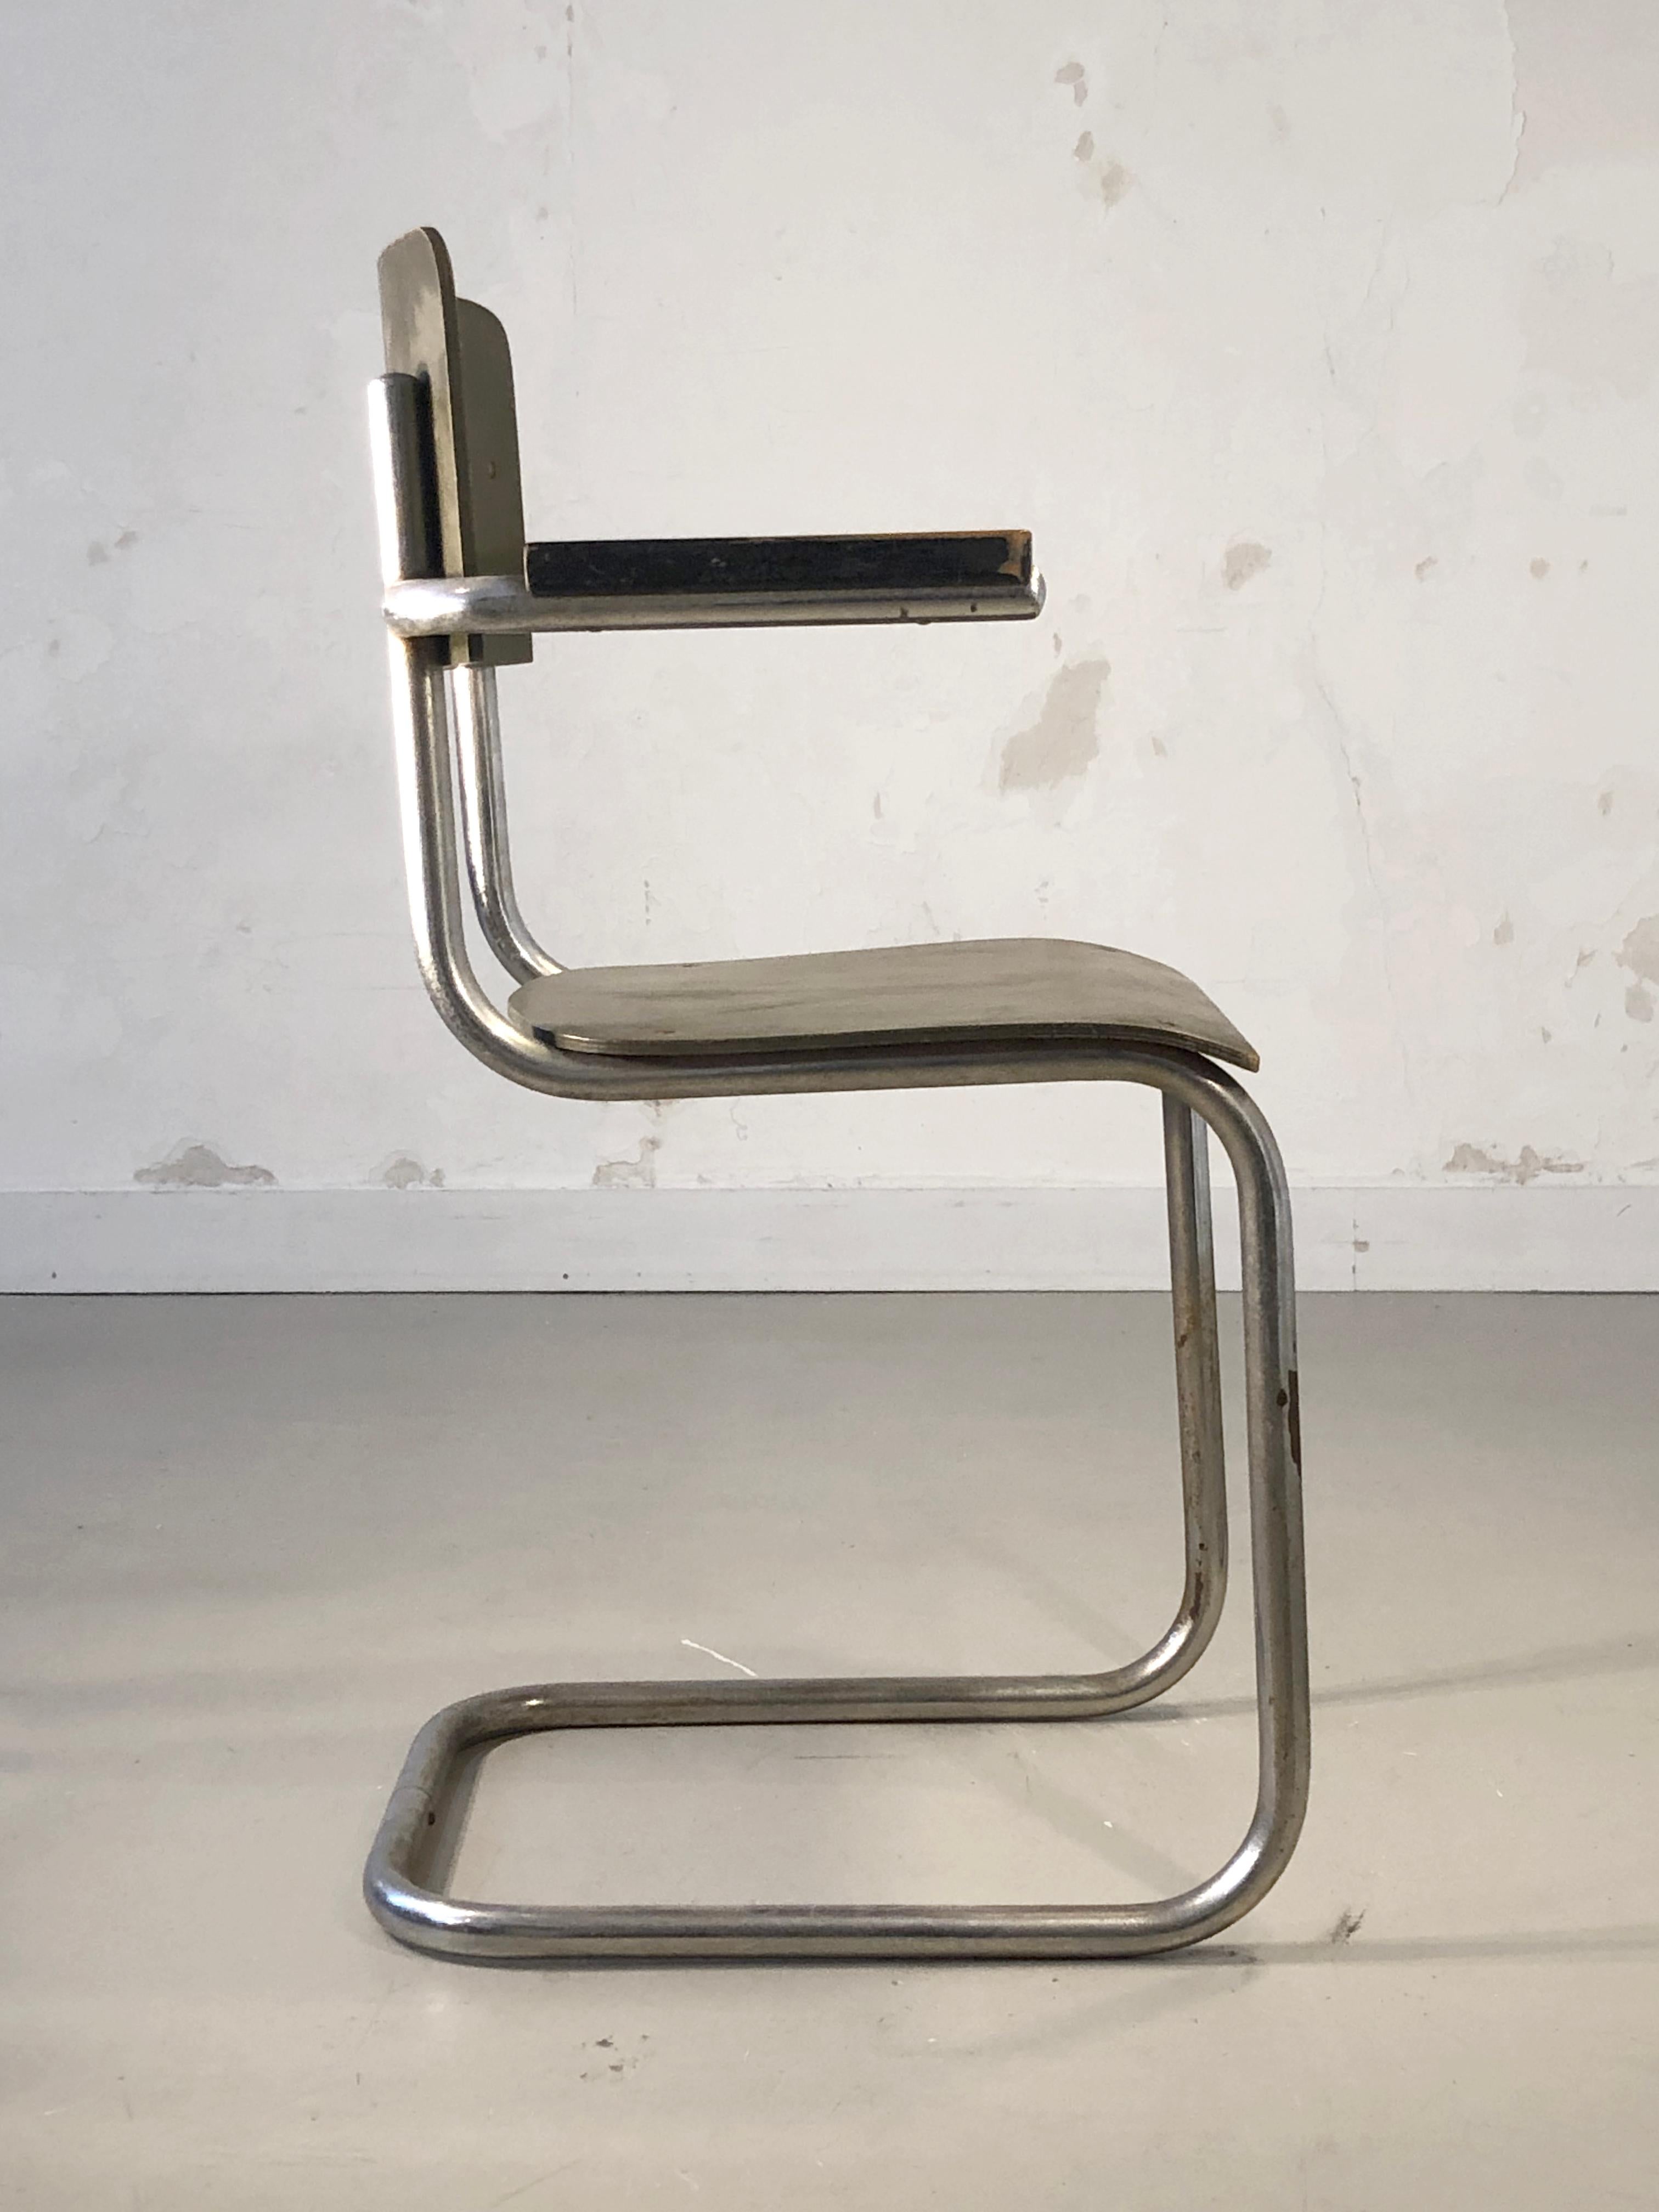 An Early MODERNIST BAUHAUS CHAIR by MART STAM for MAUSER WERKE, Germany 1930 For Sale 3